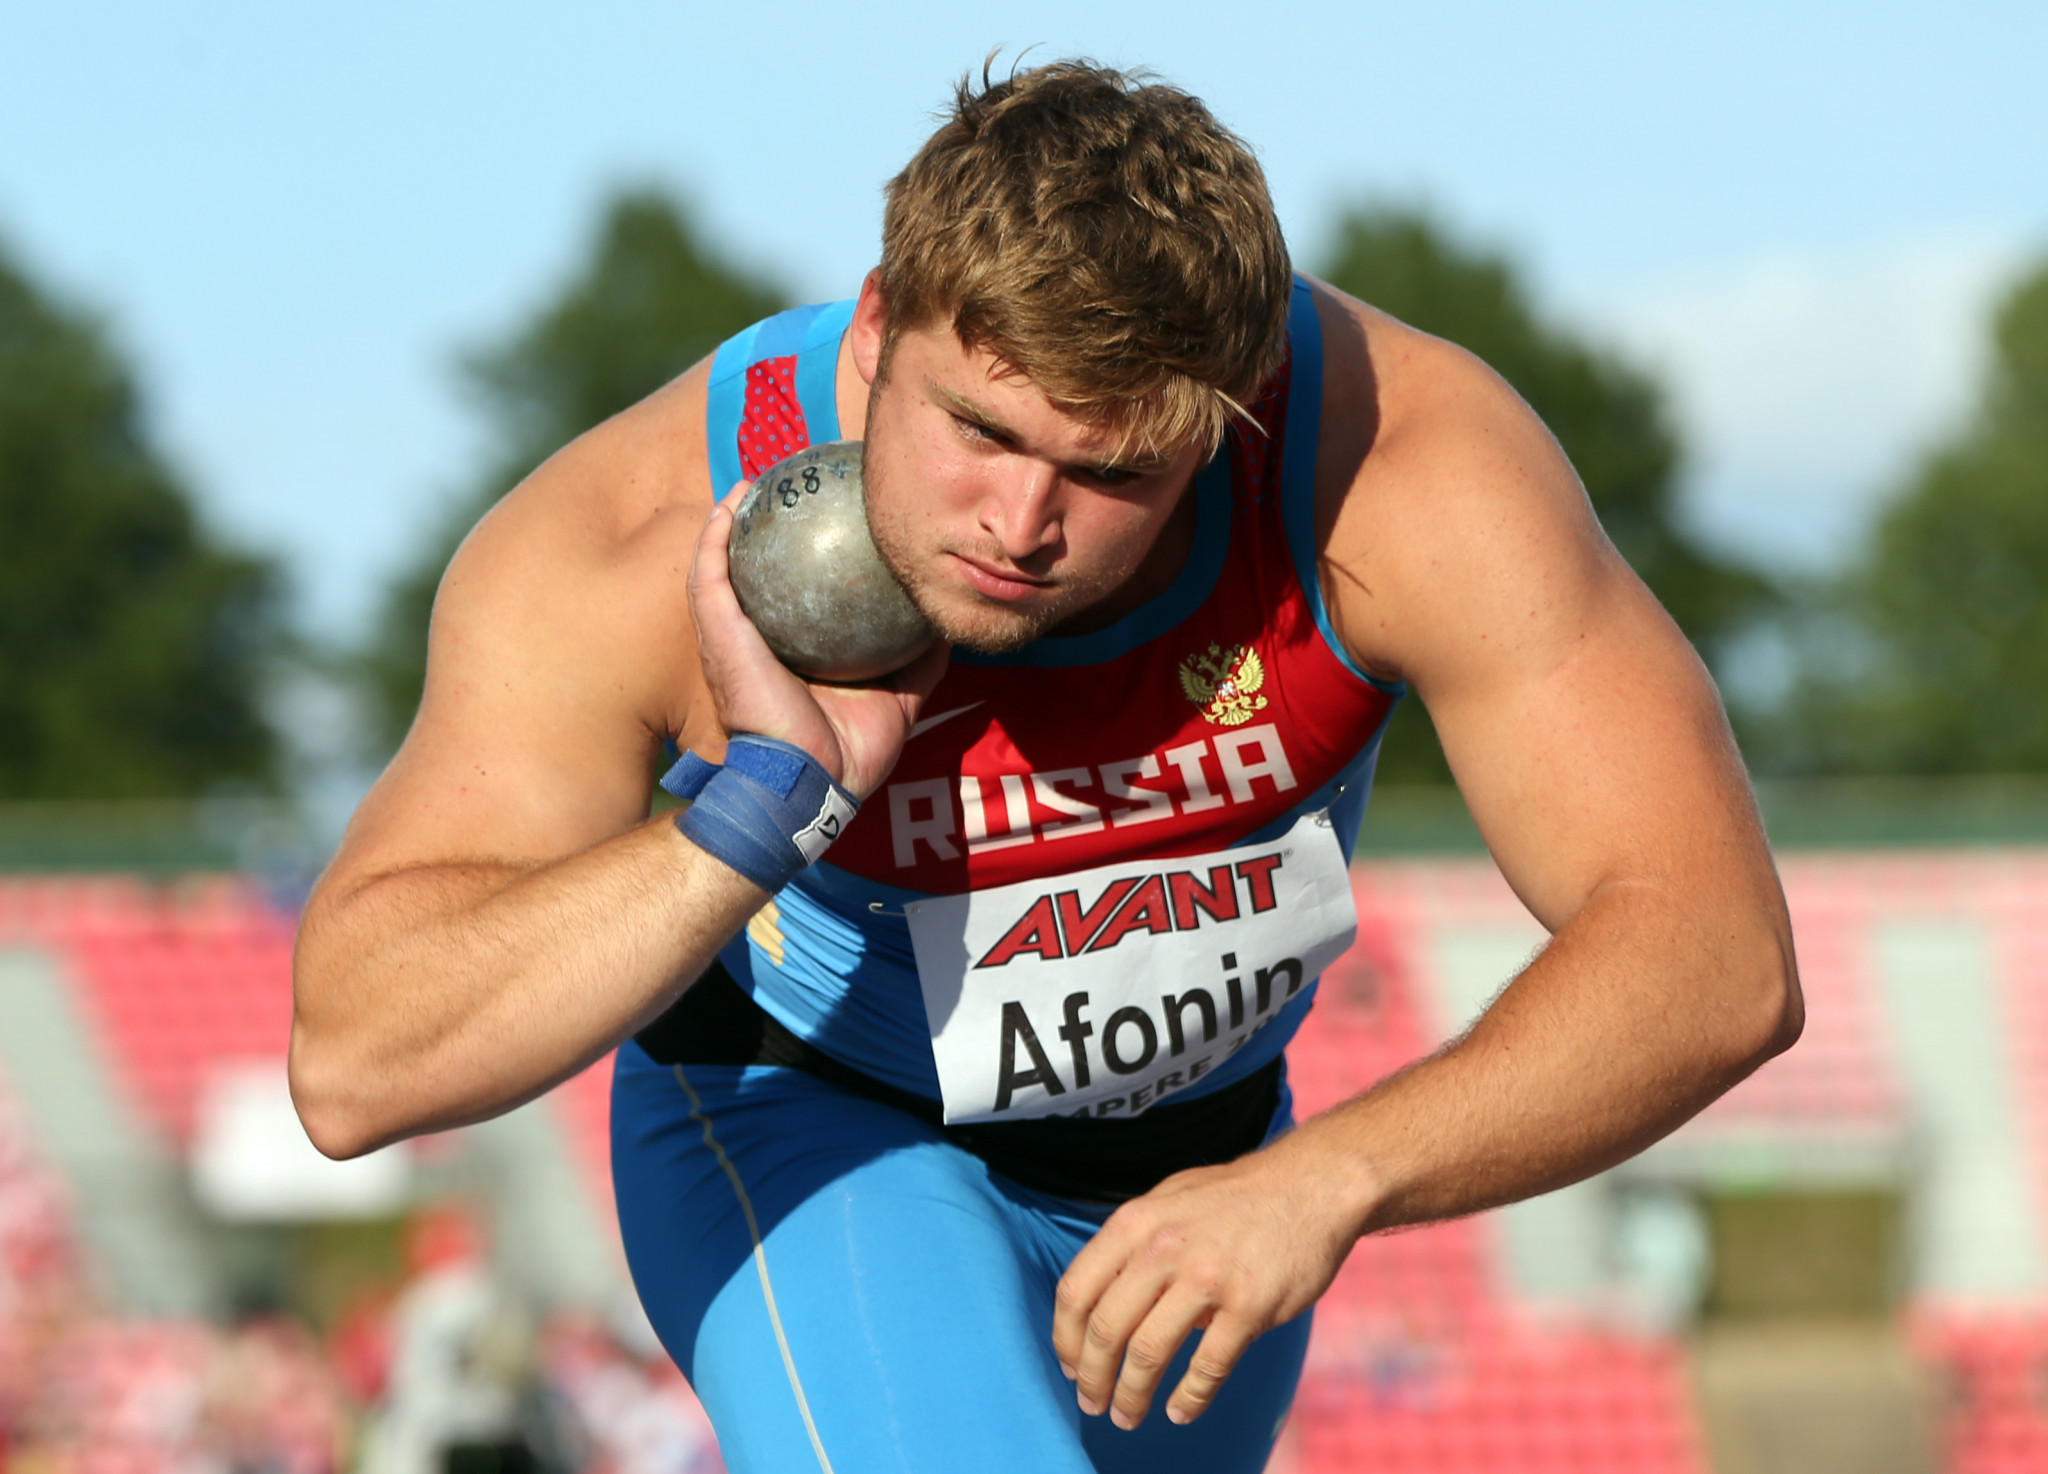 Maksim Afonin set a personal shot put record of  21.07 metres last year ©Getty Images